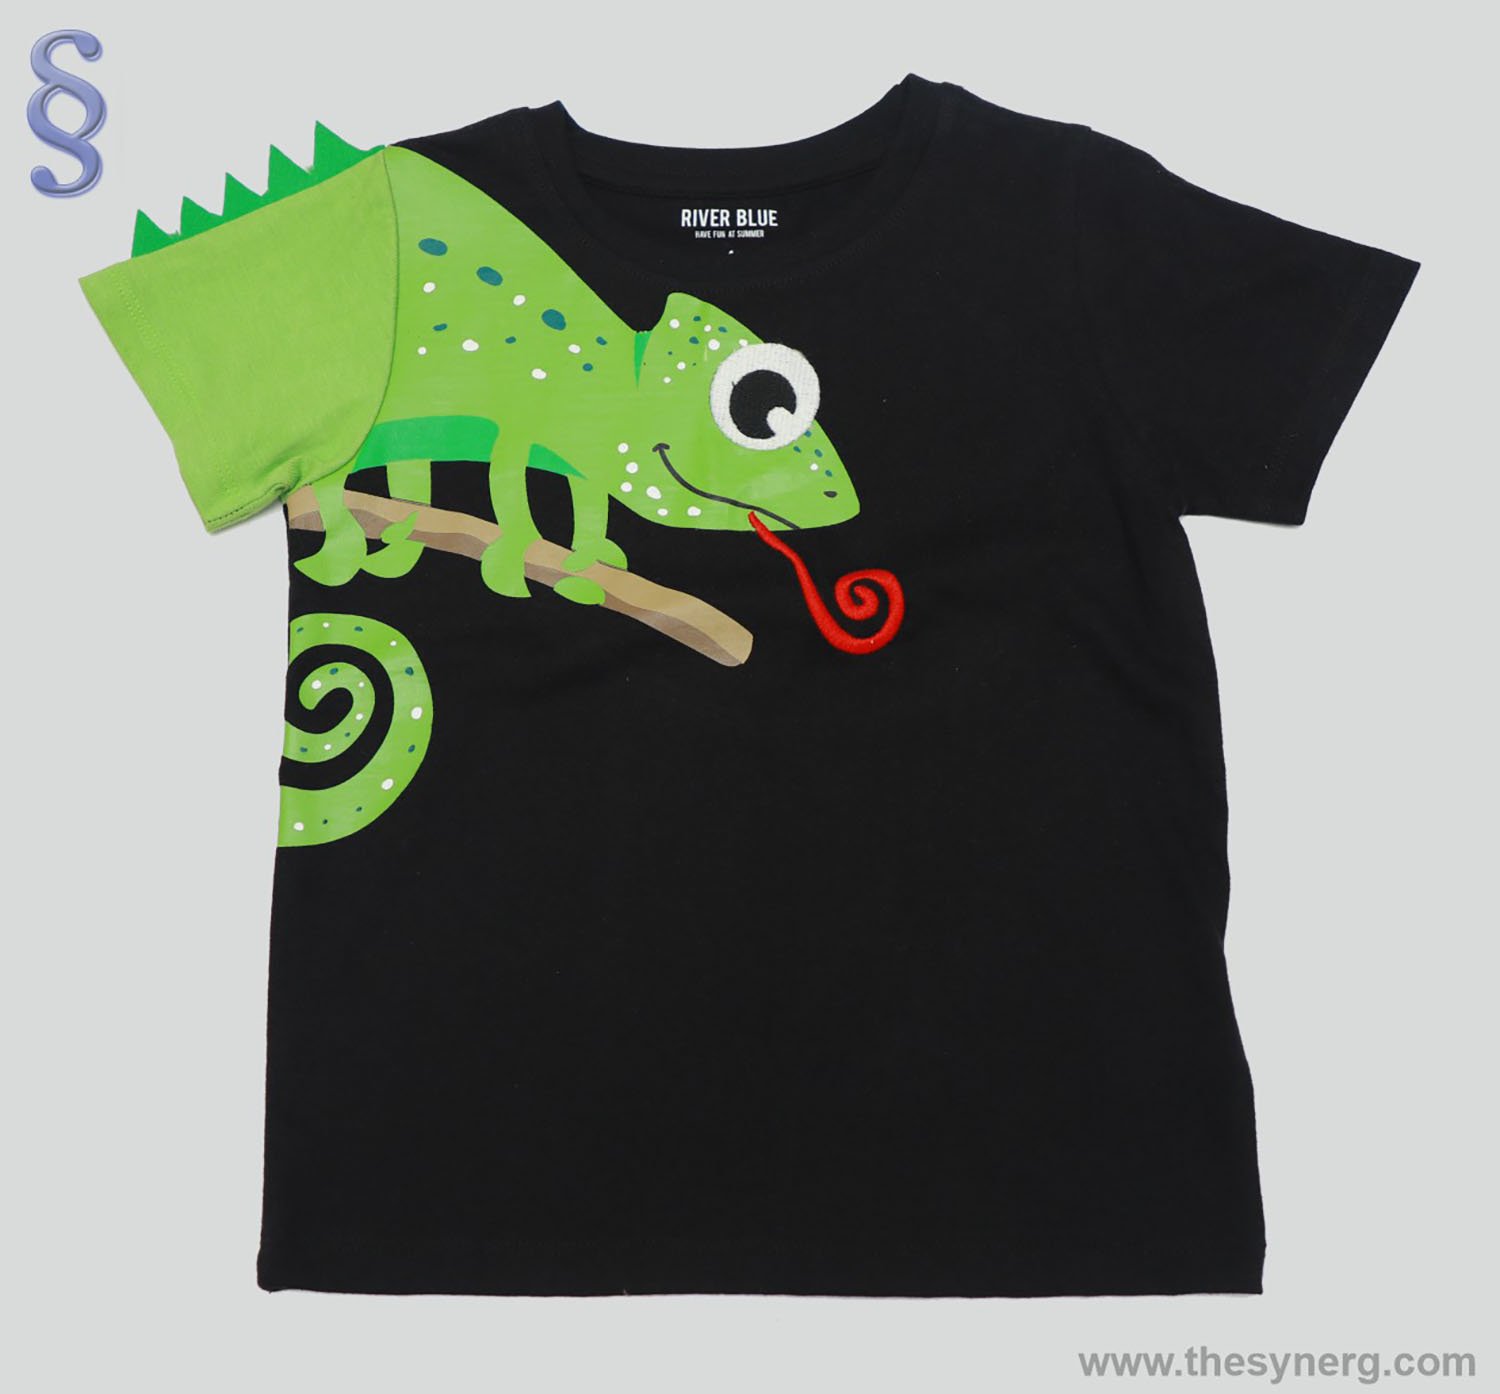 Children's toddler kids clothing manufacturers factory in India